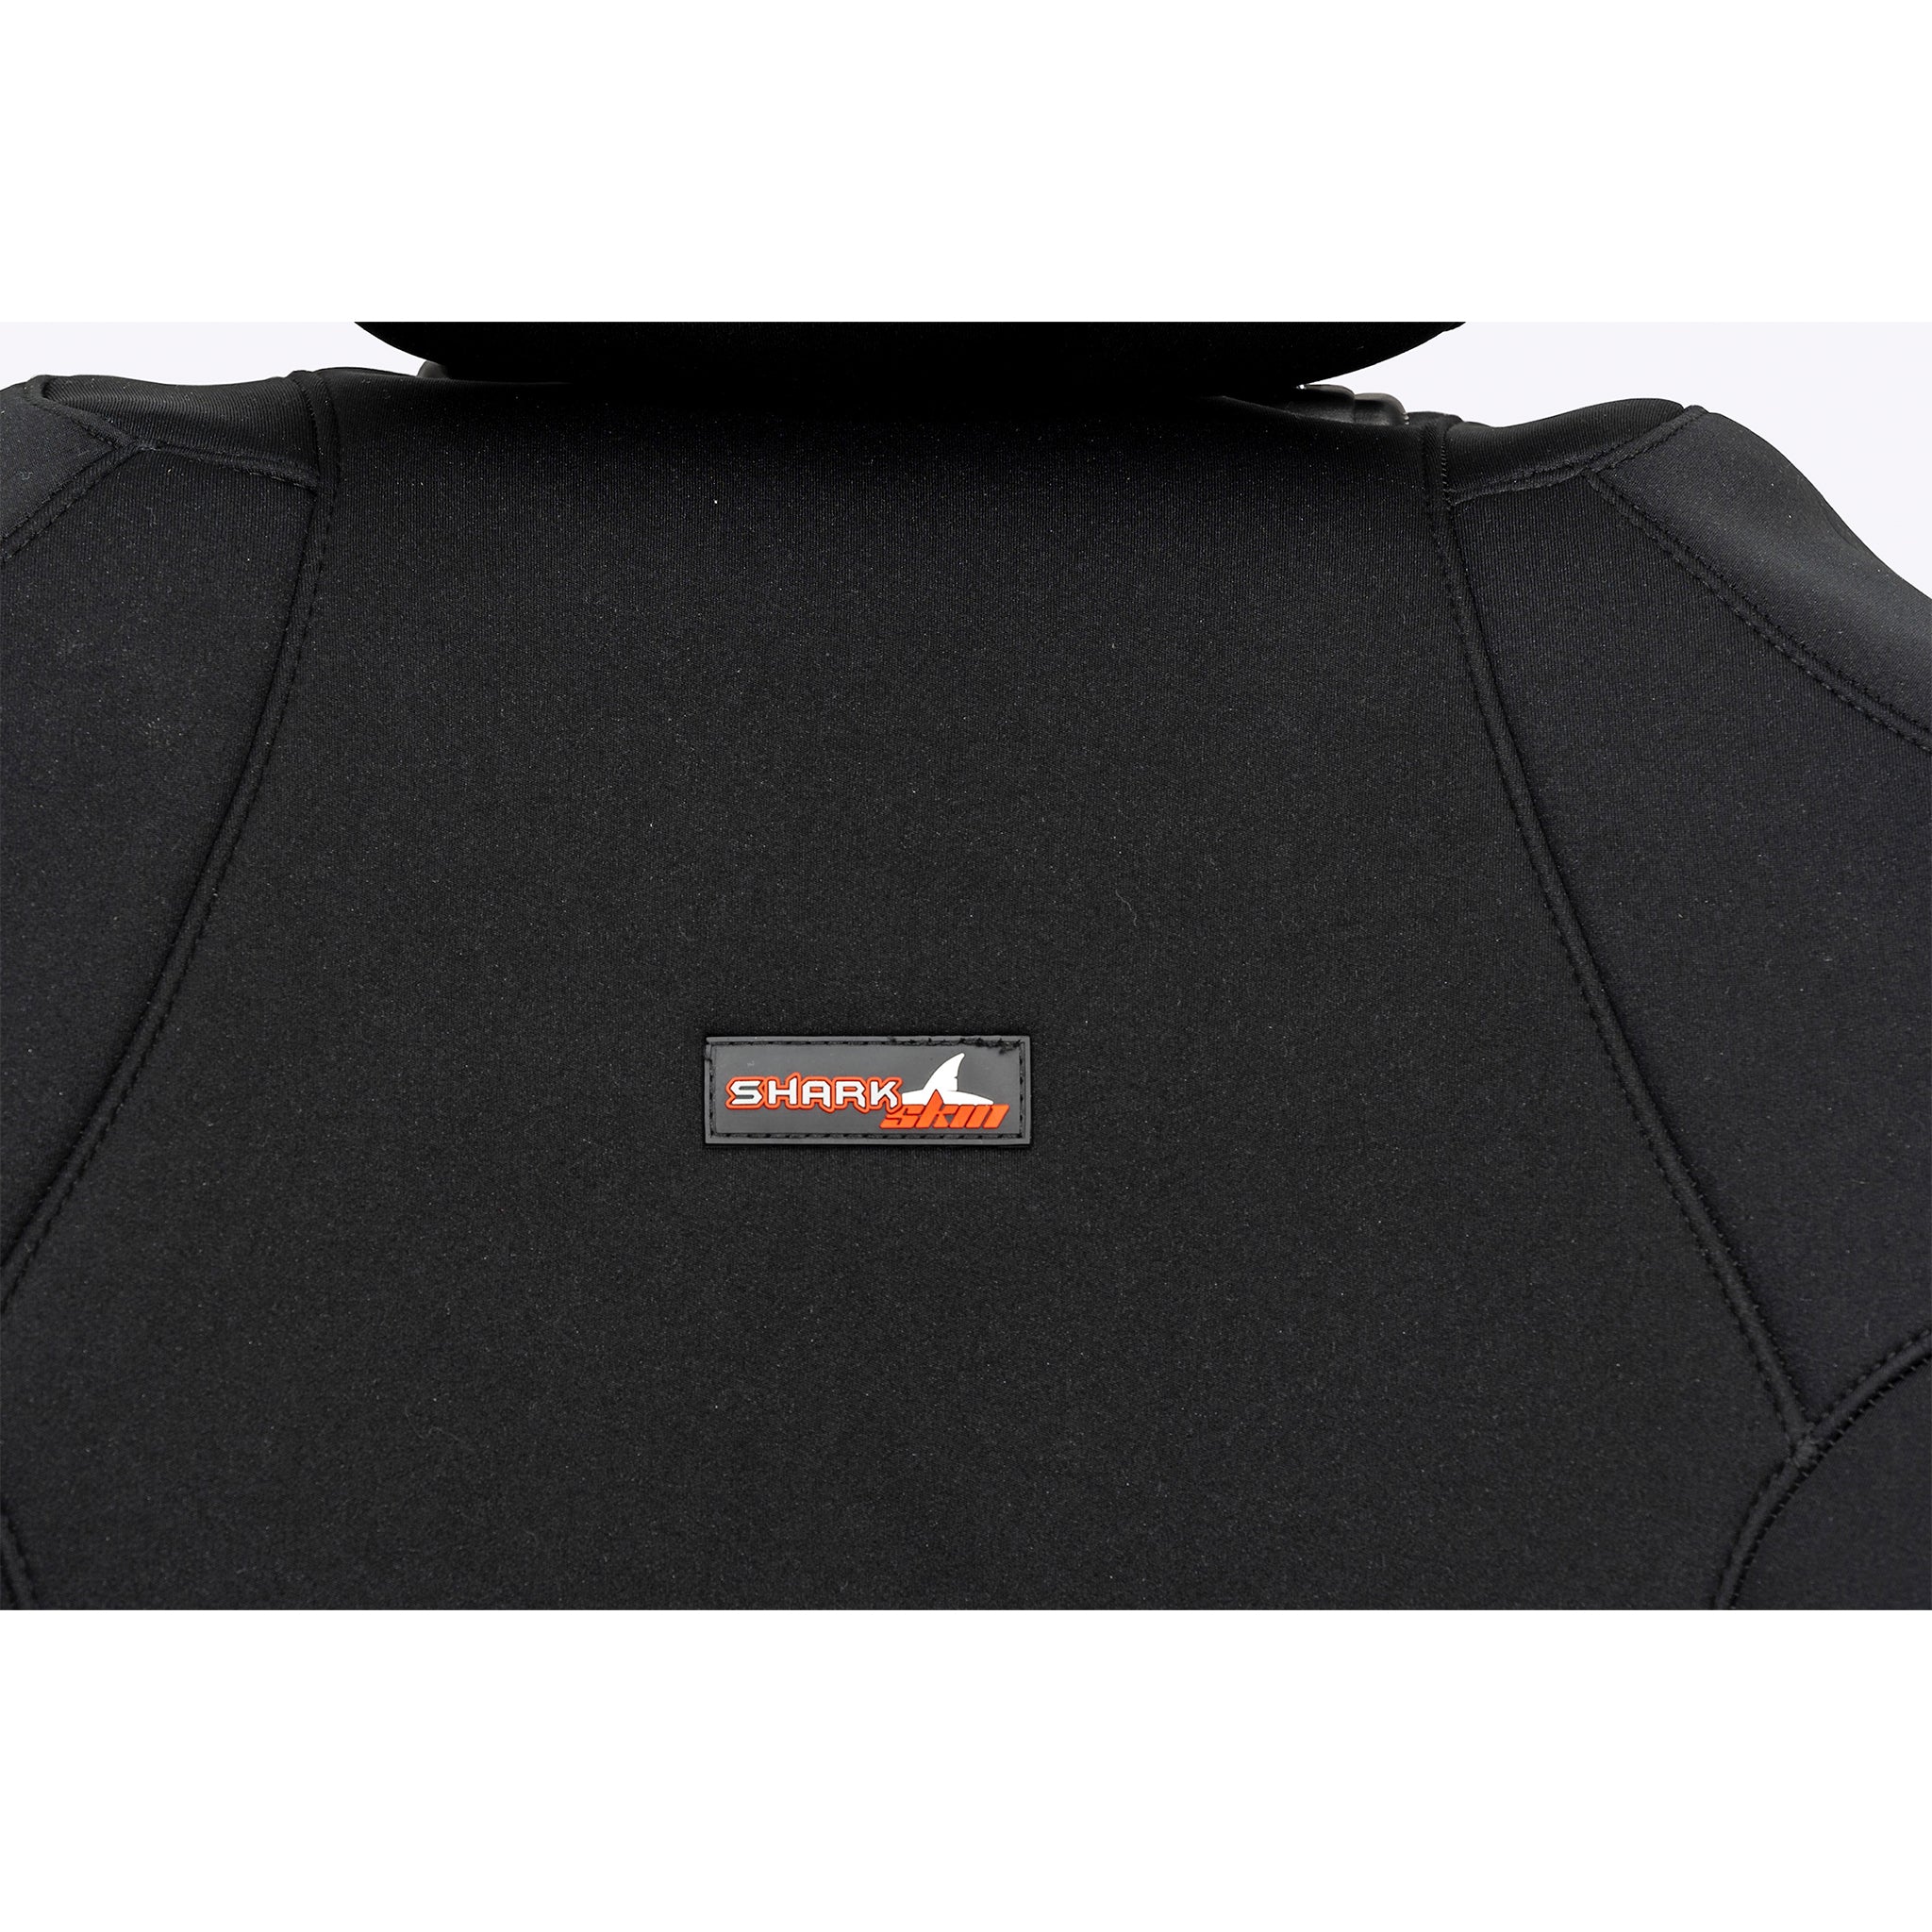 Sharkskin Seat Covers- Suitable for Toyota Hilux Dual Cab (2005-2015)